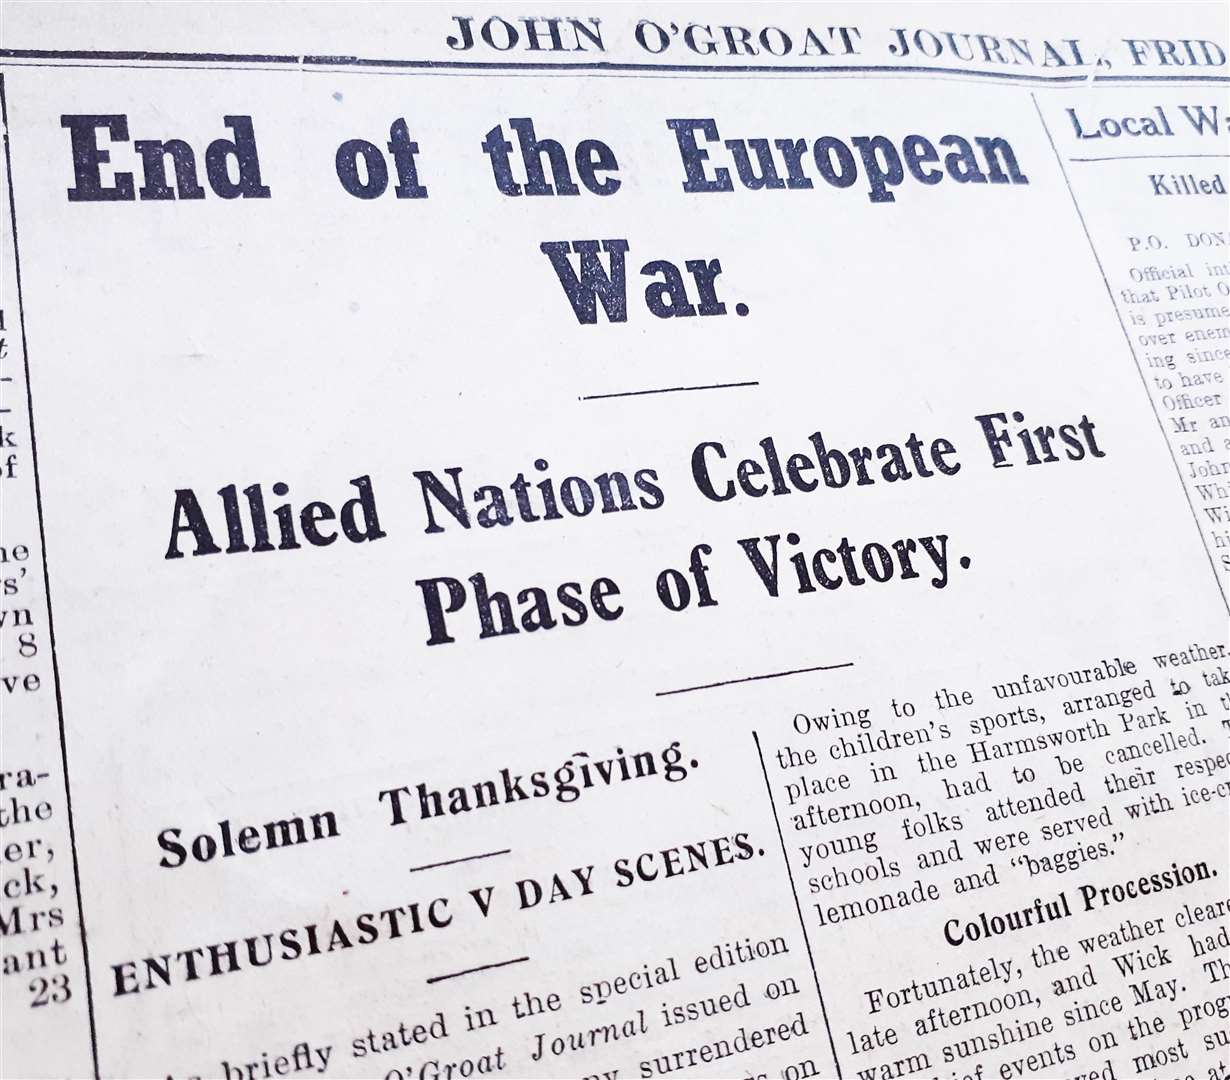 How the John O'Groat Journal reported the end of the war in Europe in its edition of May 11, 1945.